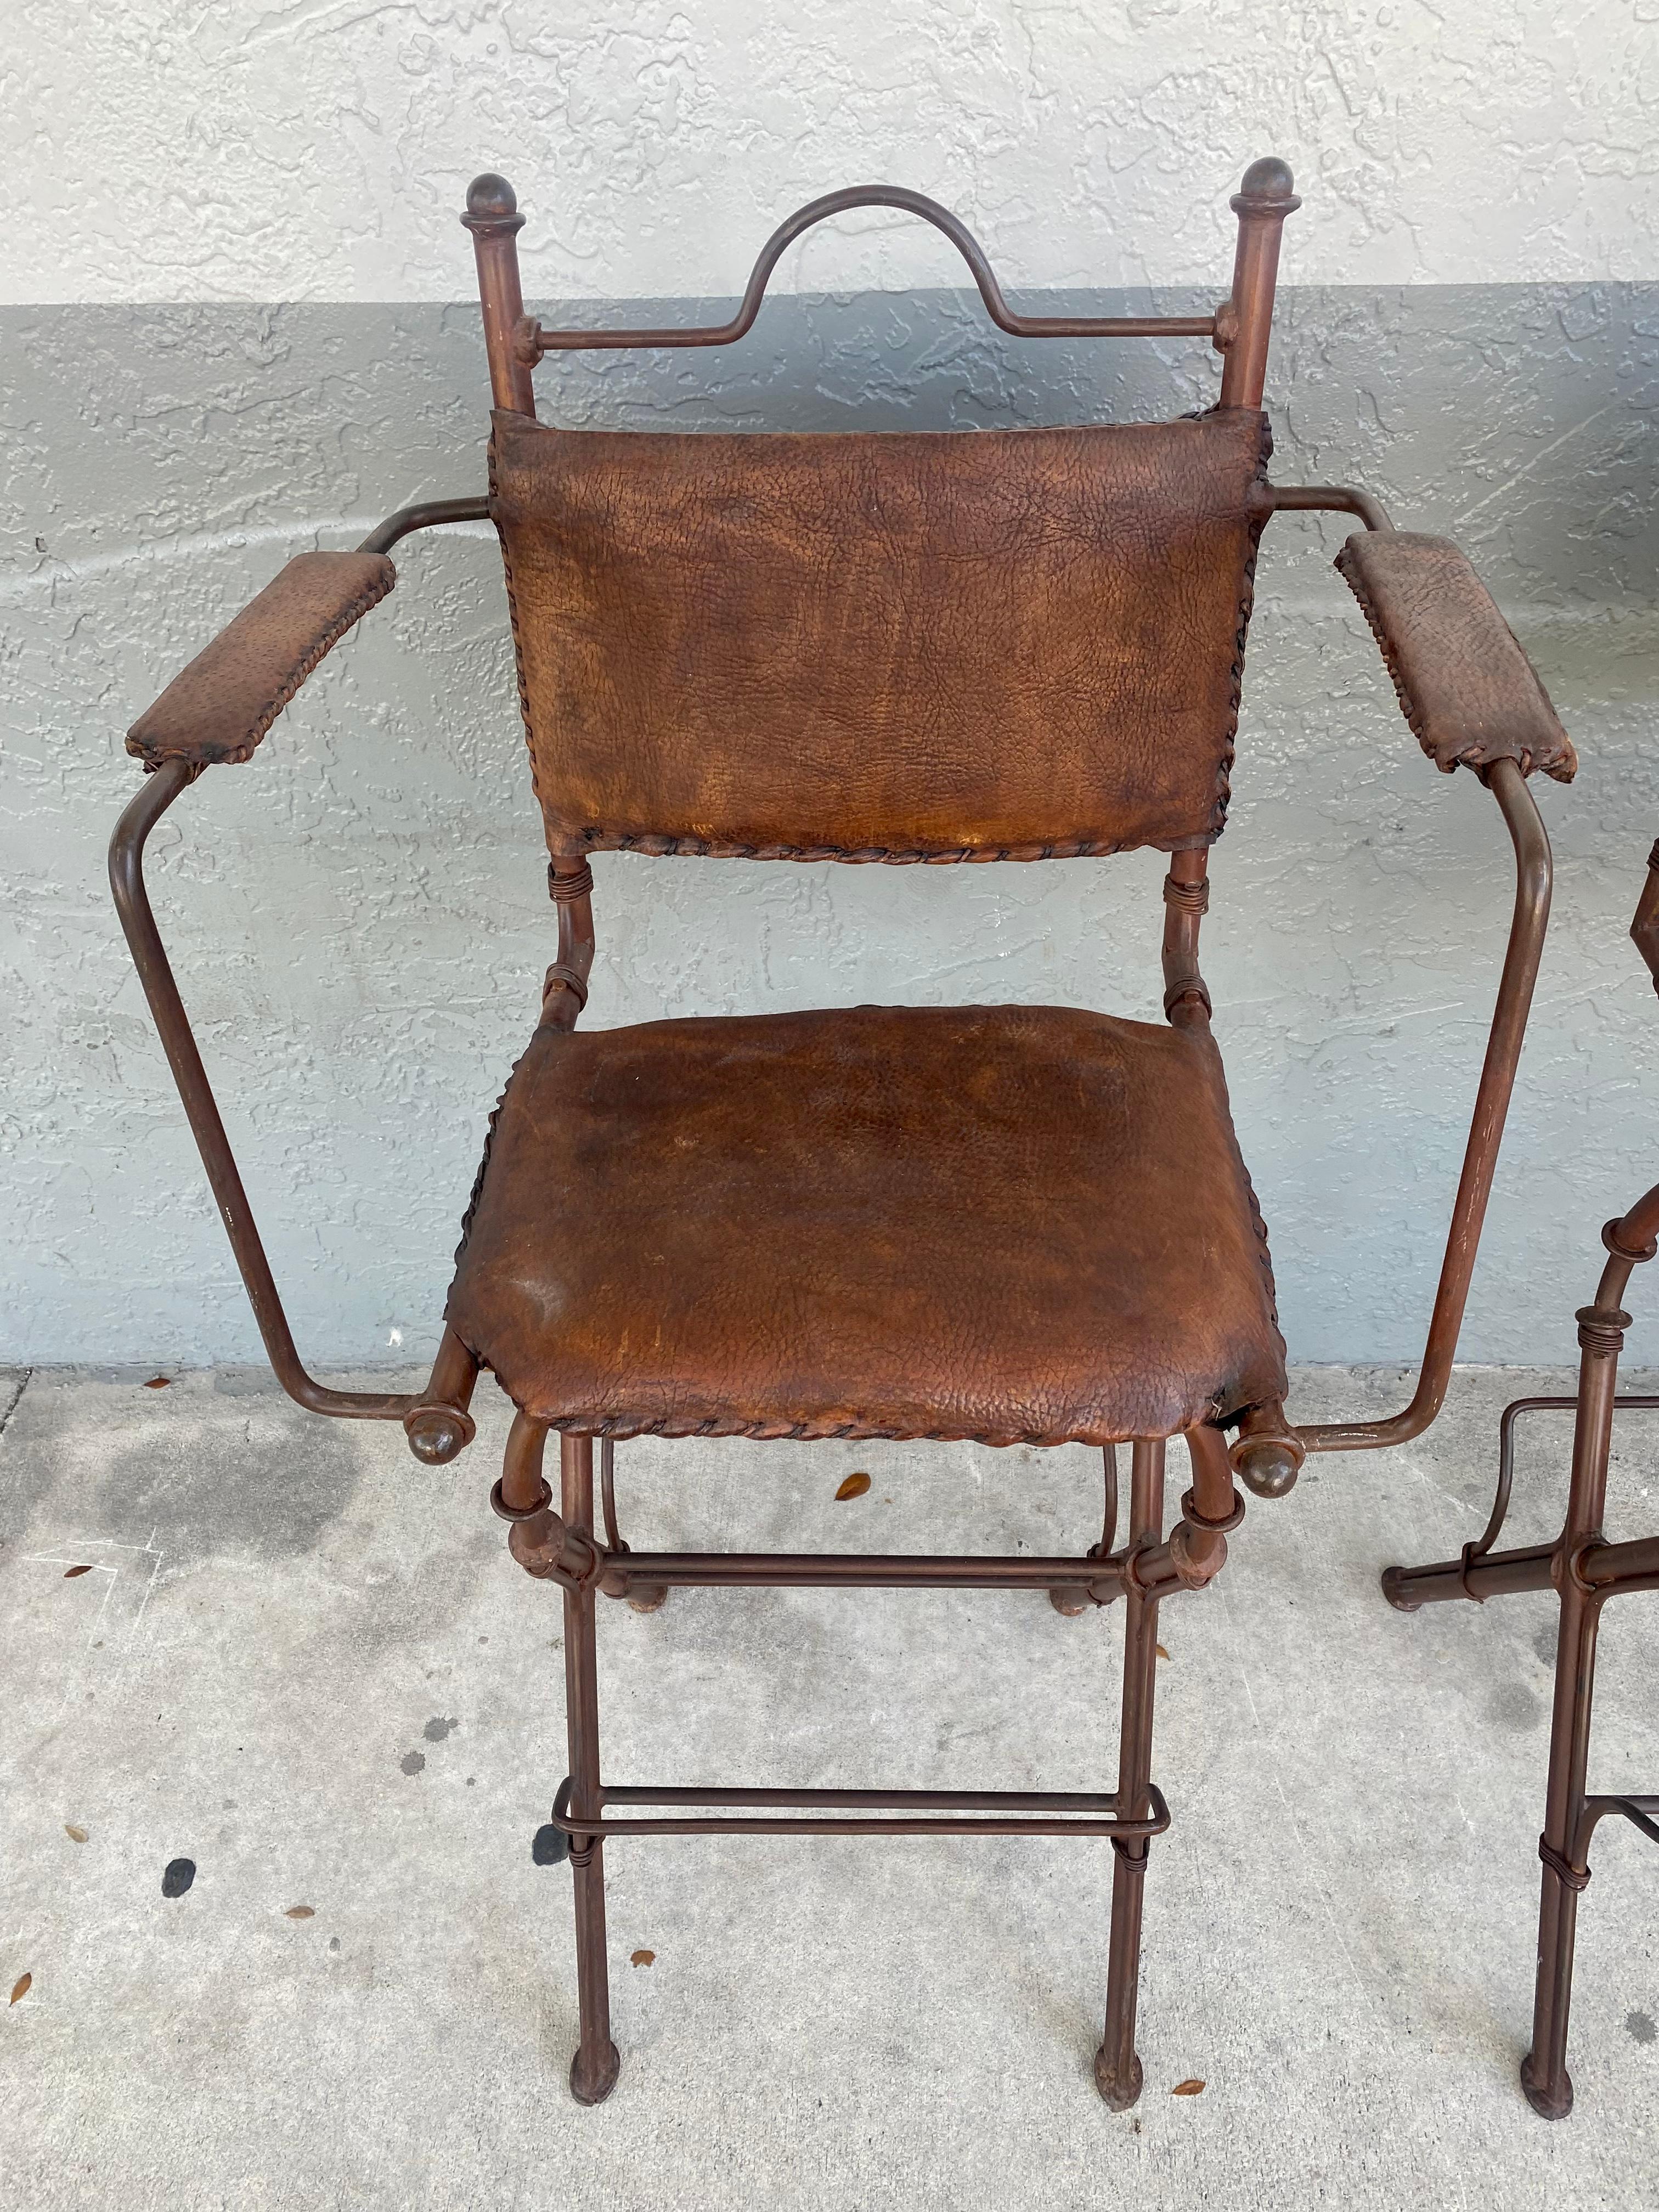 1940s Rustic Industrial Iron and Buffalo Leather Swivel Stools, Set of 4 For Sale 6